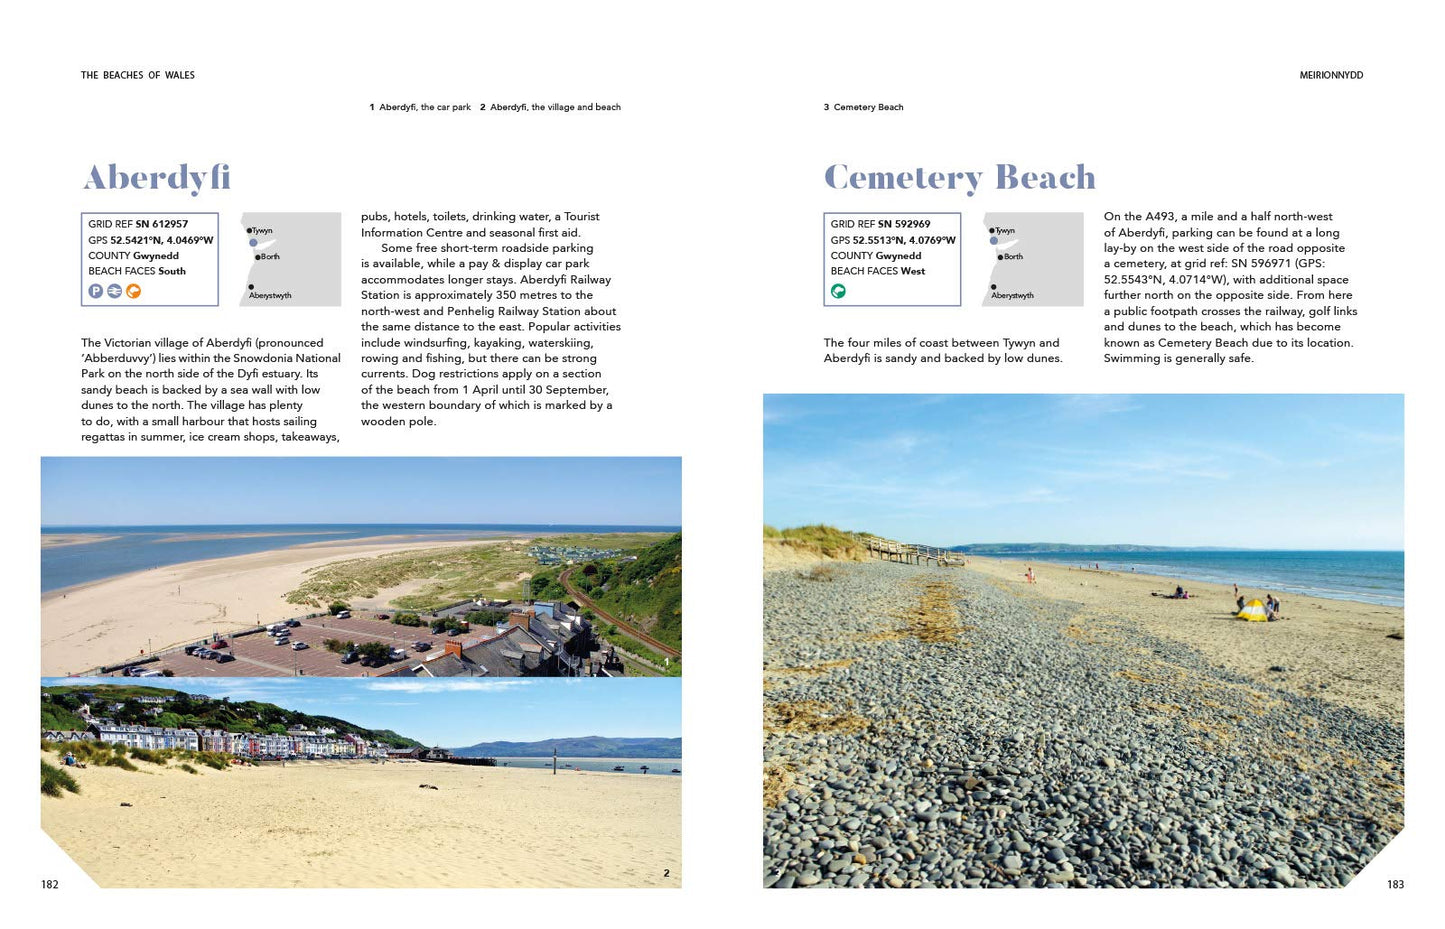 Book - The Beaches of Wales - Paperback